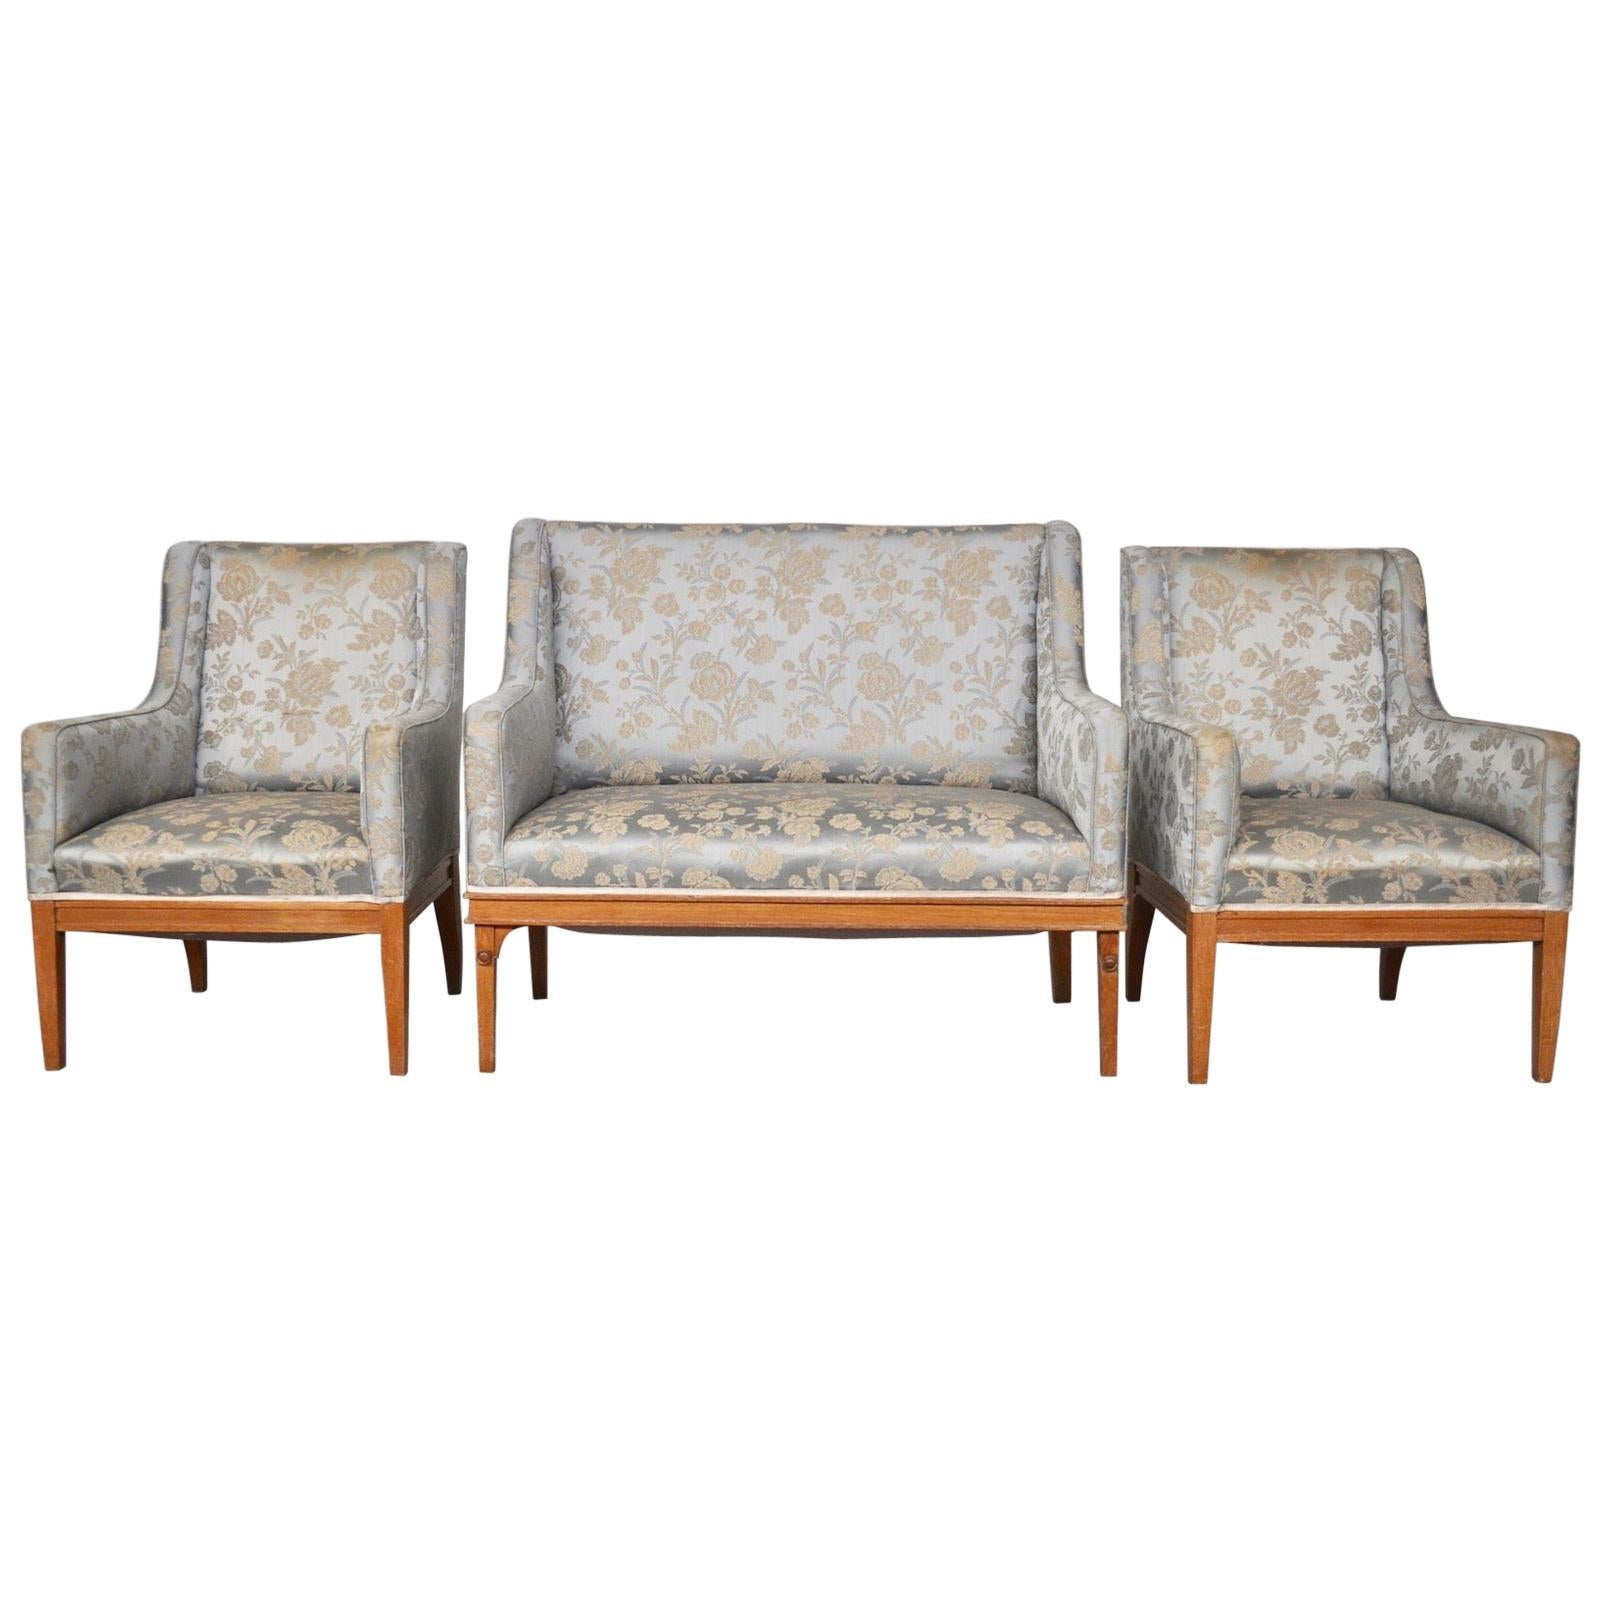 Lovesats and Armchairs in Ash Wood, Austria 1930s For Sale